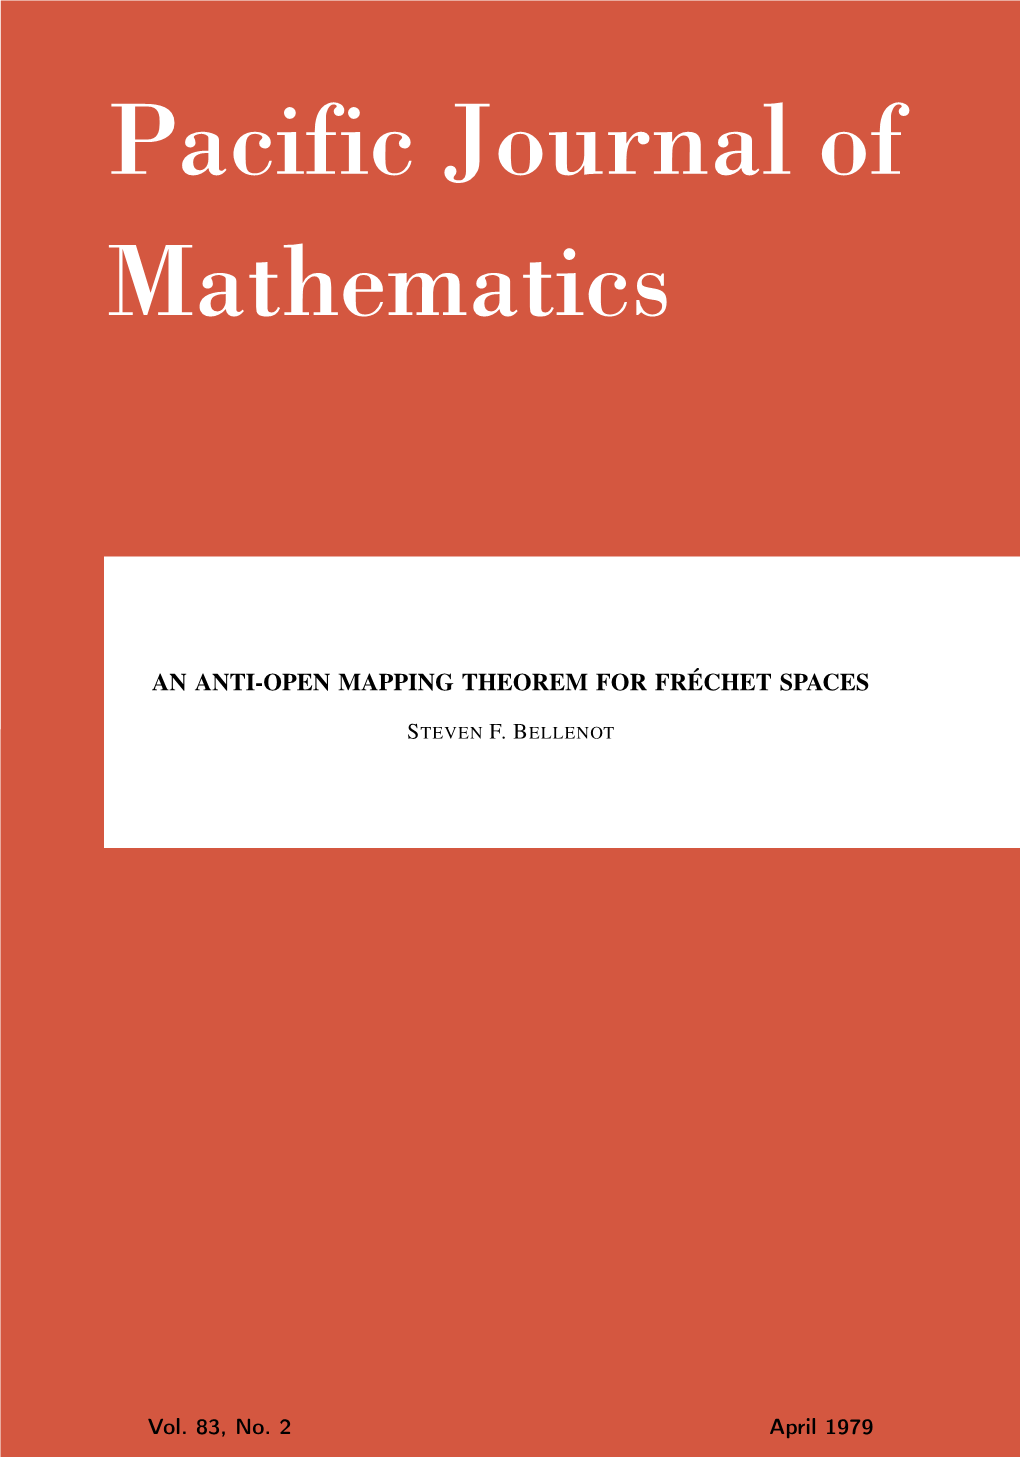 An Anti-Open Mapping Theorem for Fréchet Spaces